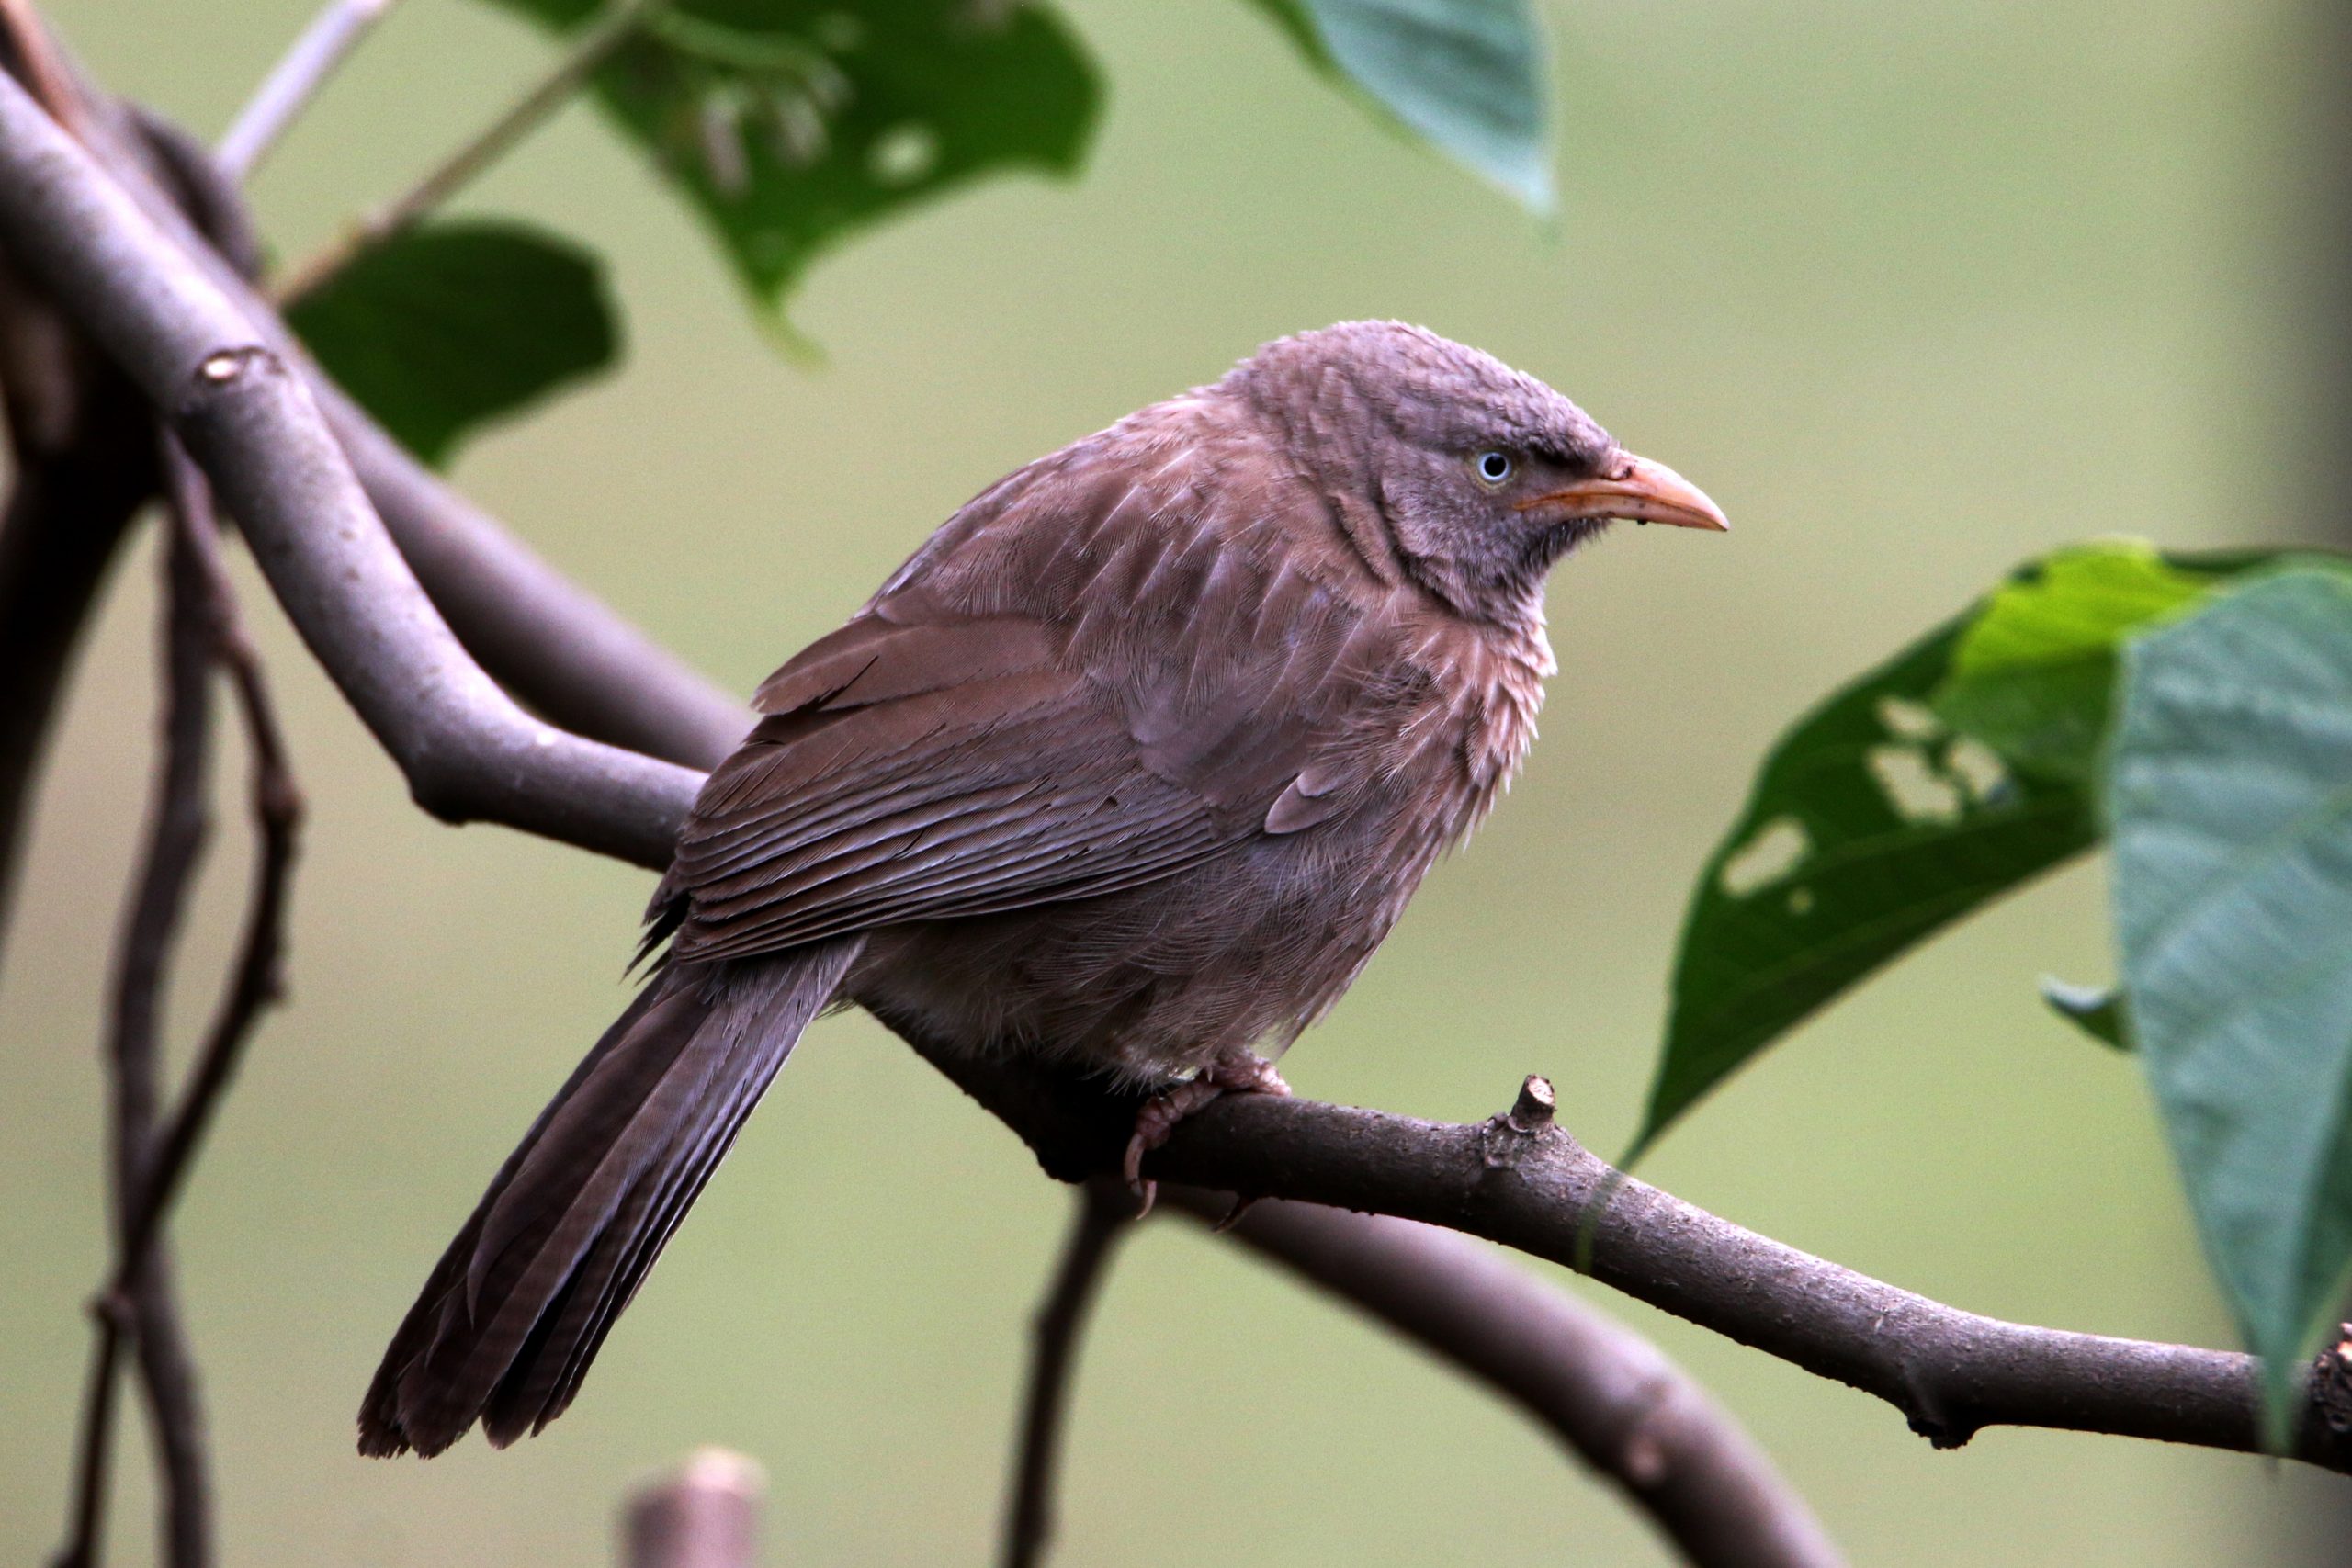 Common Babbler sitting on the branch of the tree.